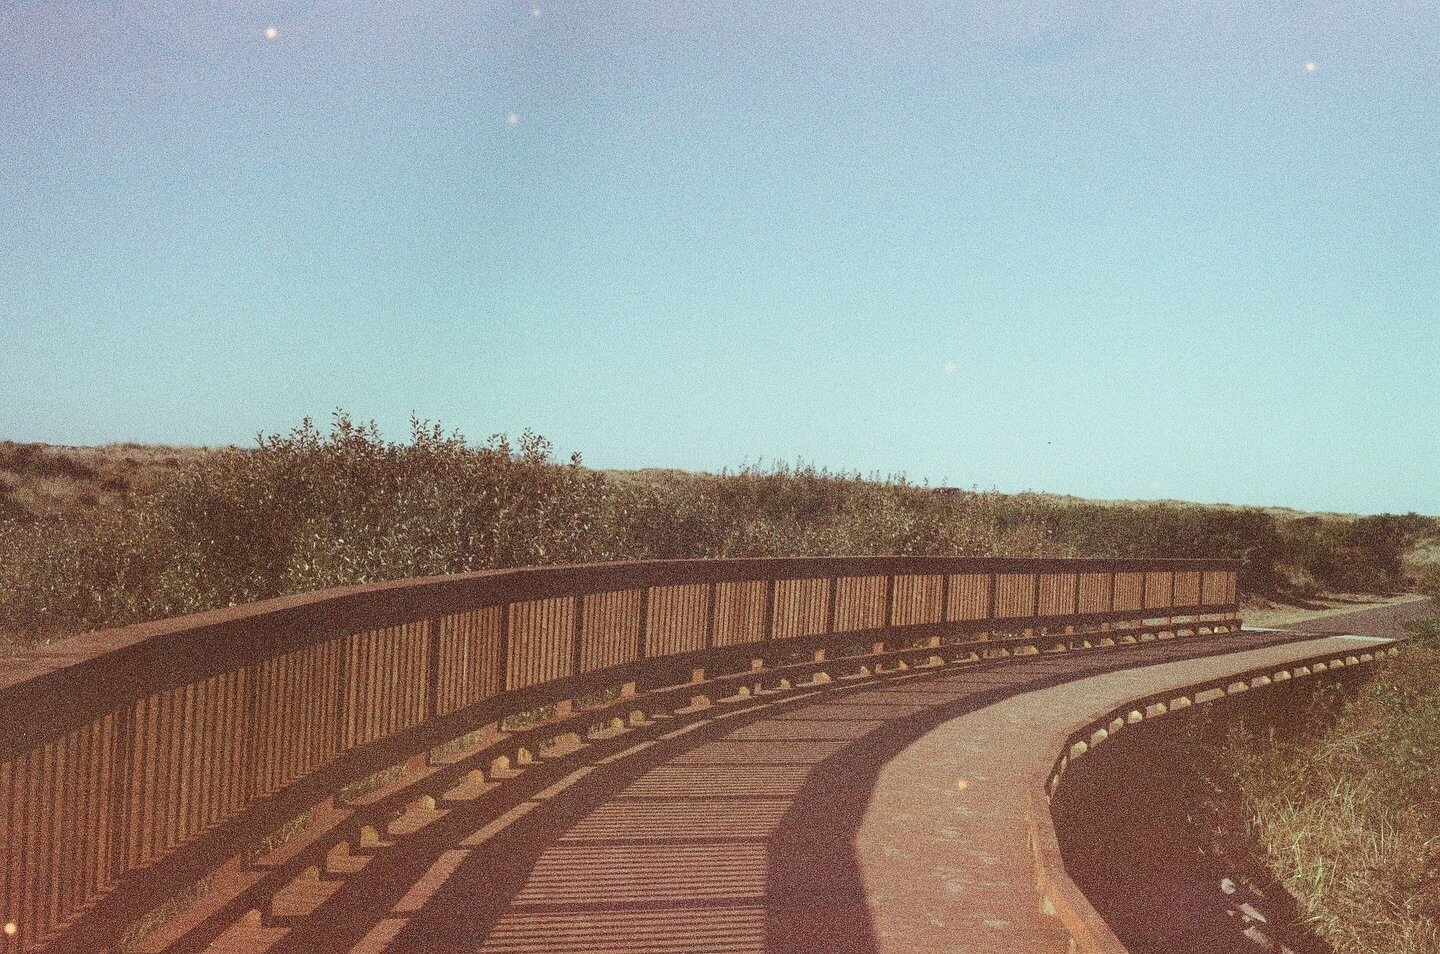 Ocean Shores opened a new multi use trail. Got to walk it on a recent sunny day #cinestill800t developed by the folks at @moodysfilm